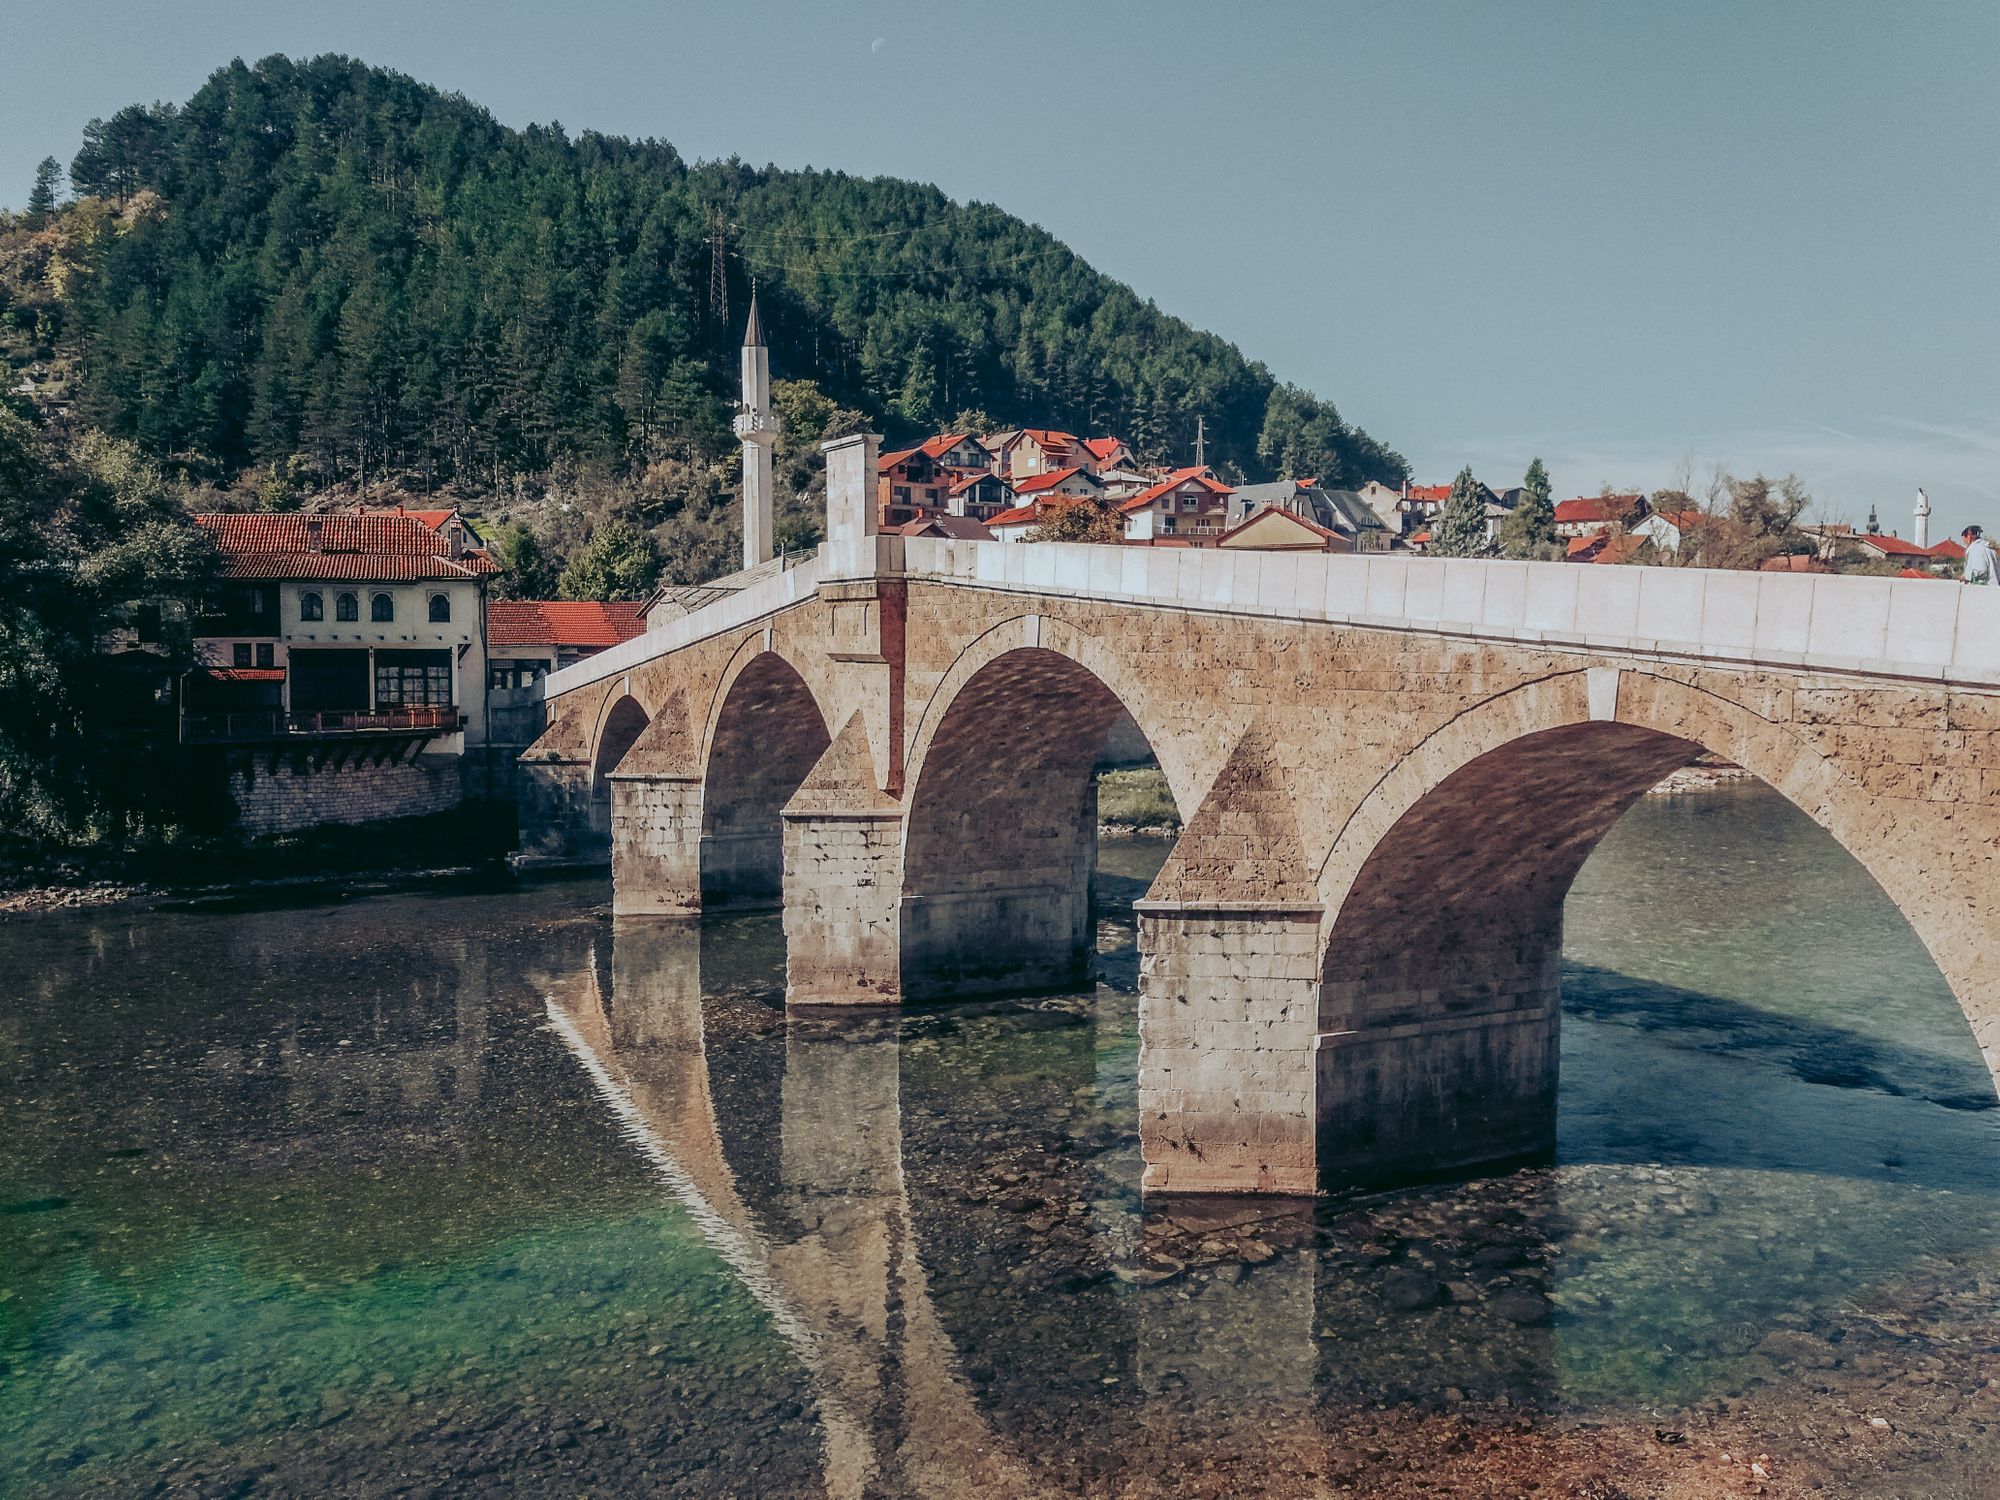 The scenic site of Konjic, Bosnia, with a bridge leading into the town.